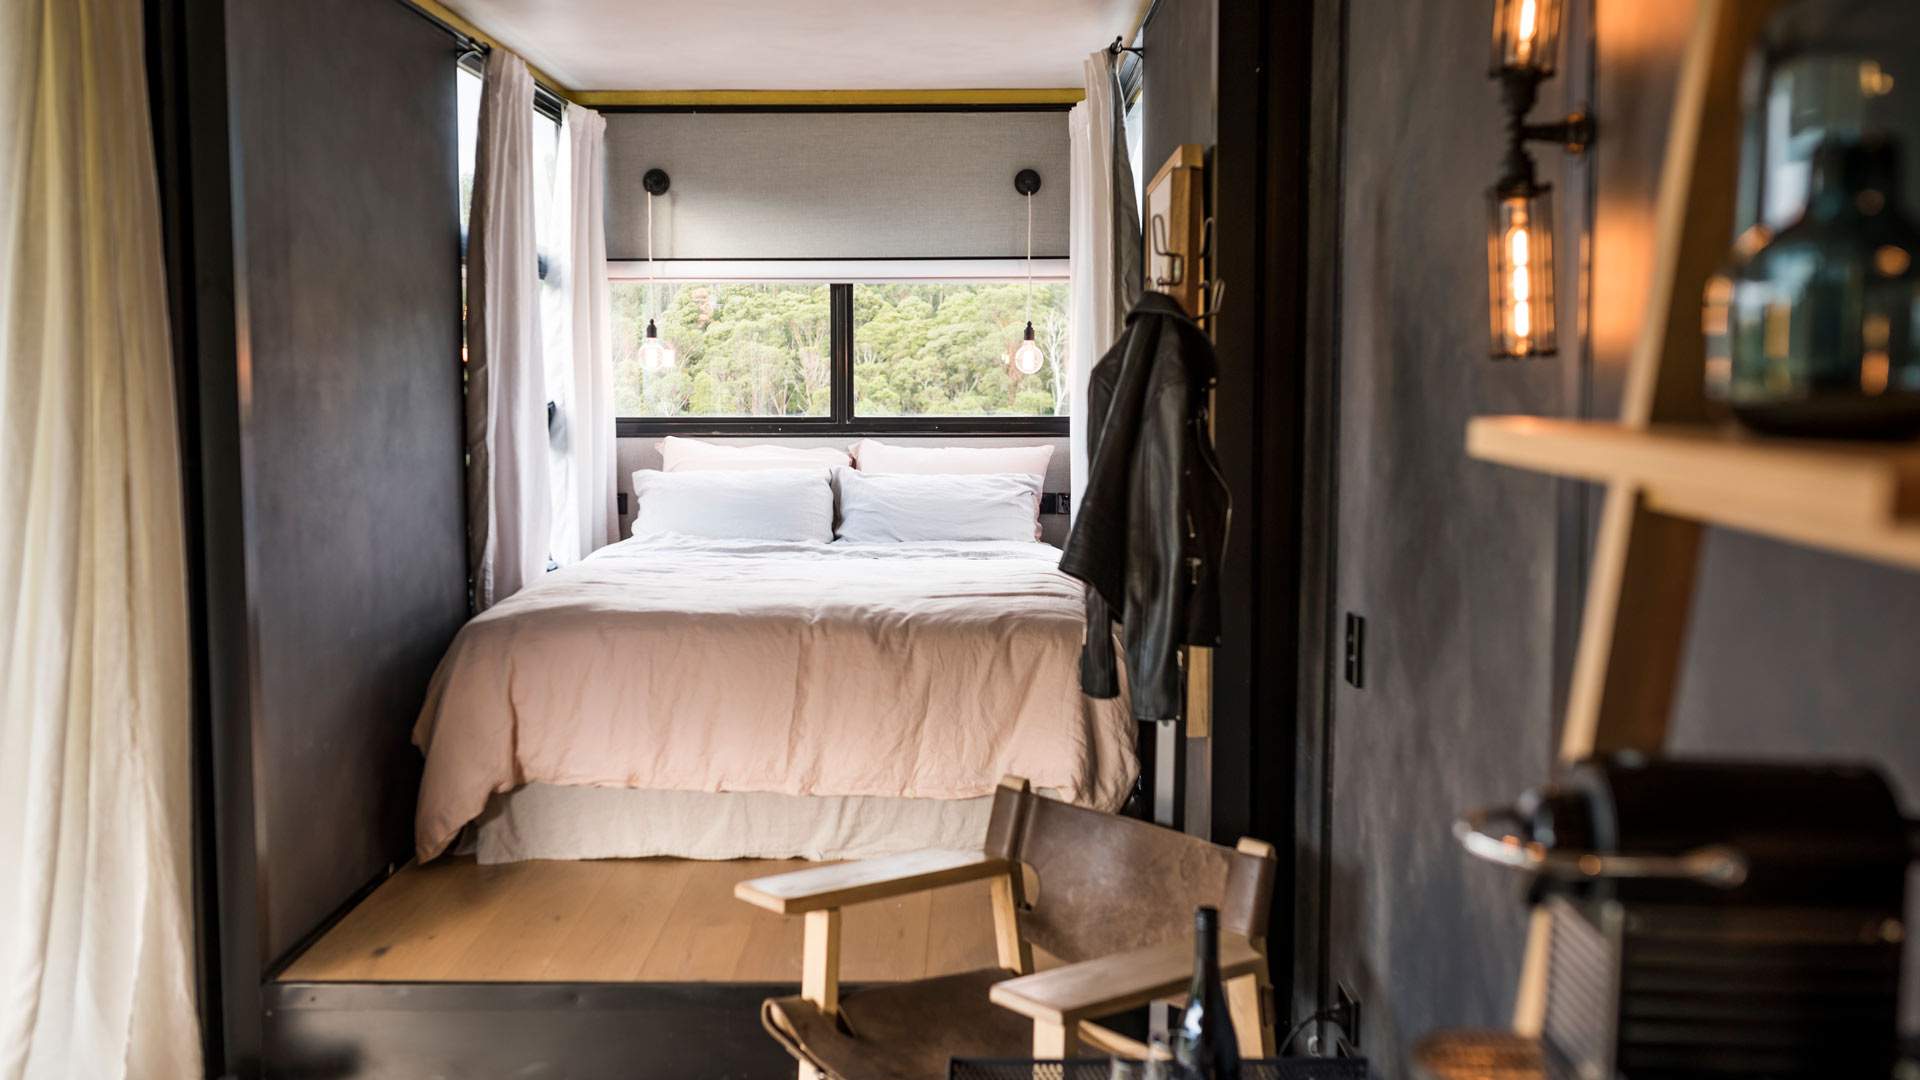 Two Shipping Container Hotels Are Popping Up on Victorian Wineries This Autumn